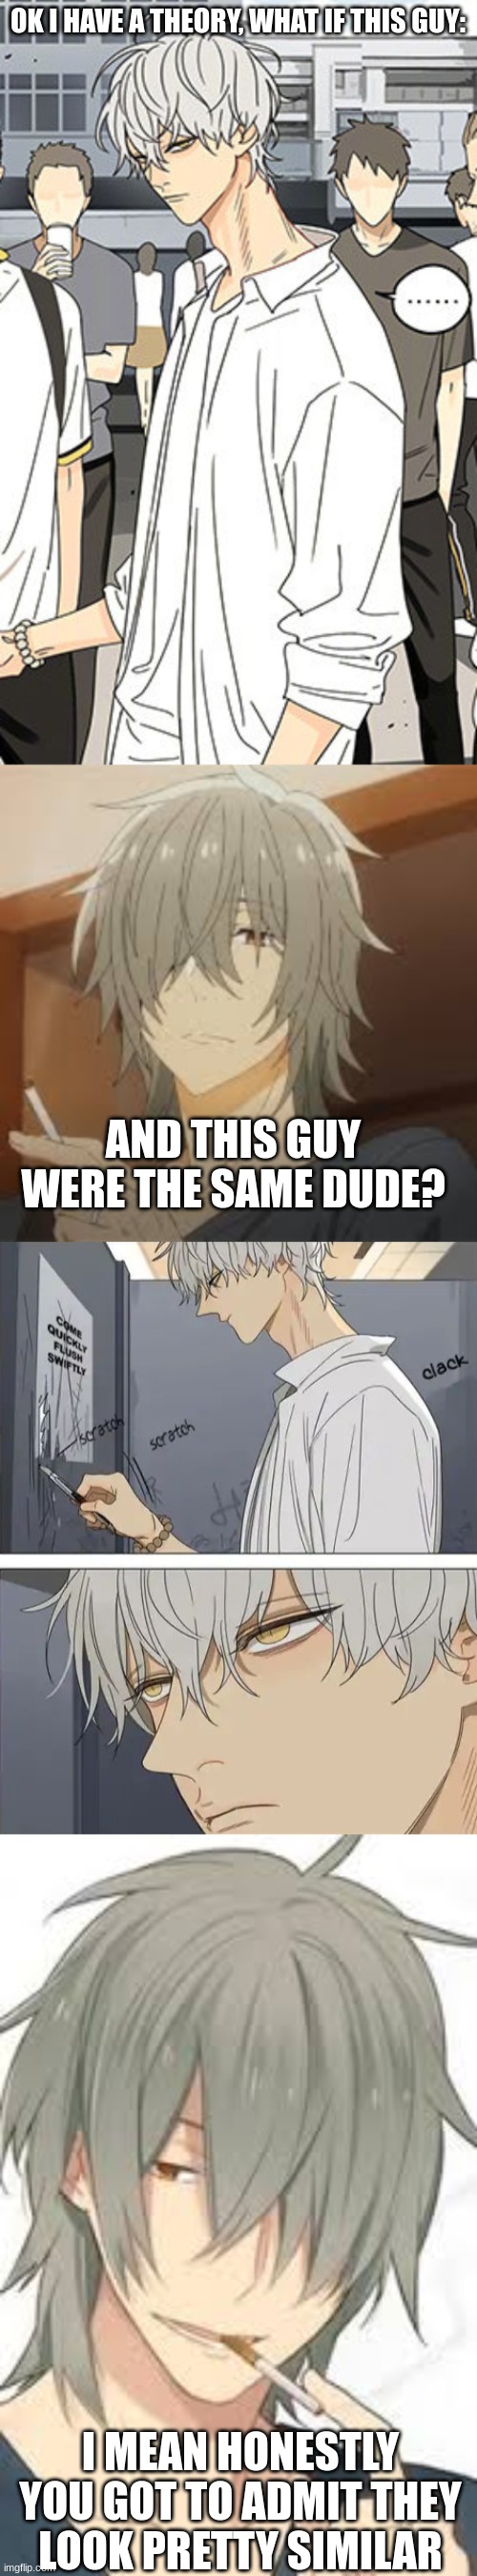 Like try to tell me they don't looks similar | OK I HAVE A THEORY, WHAT IF THIS GUY:; AND THIS GUY WERE THE SAME DUDE? I MEAN HONESTLY YOU GOT TO ADMIT THEY LOOK PRETTY SIMILAR | image tagged in anime,comparison | made w/ Imgflip meme maker